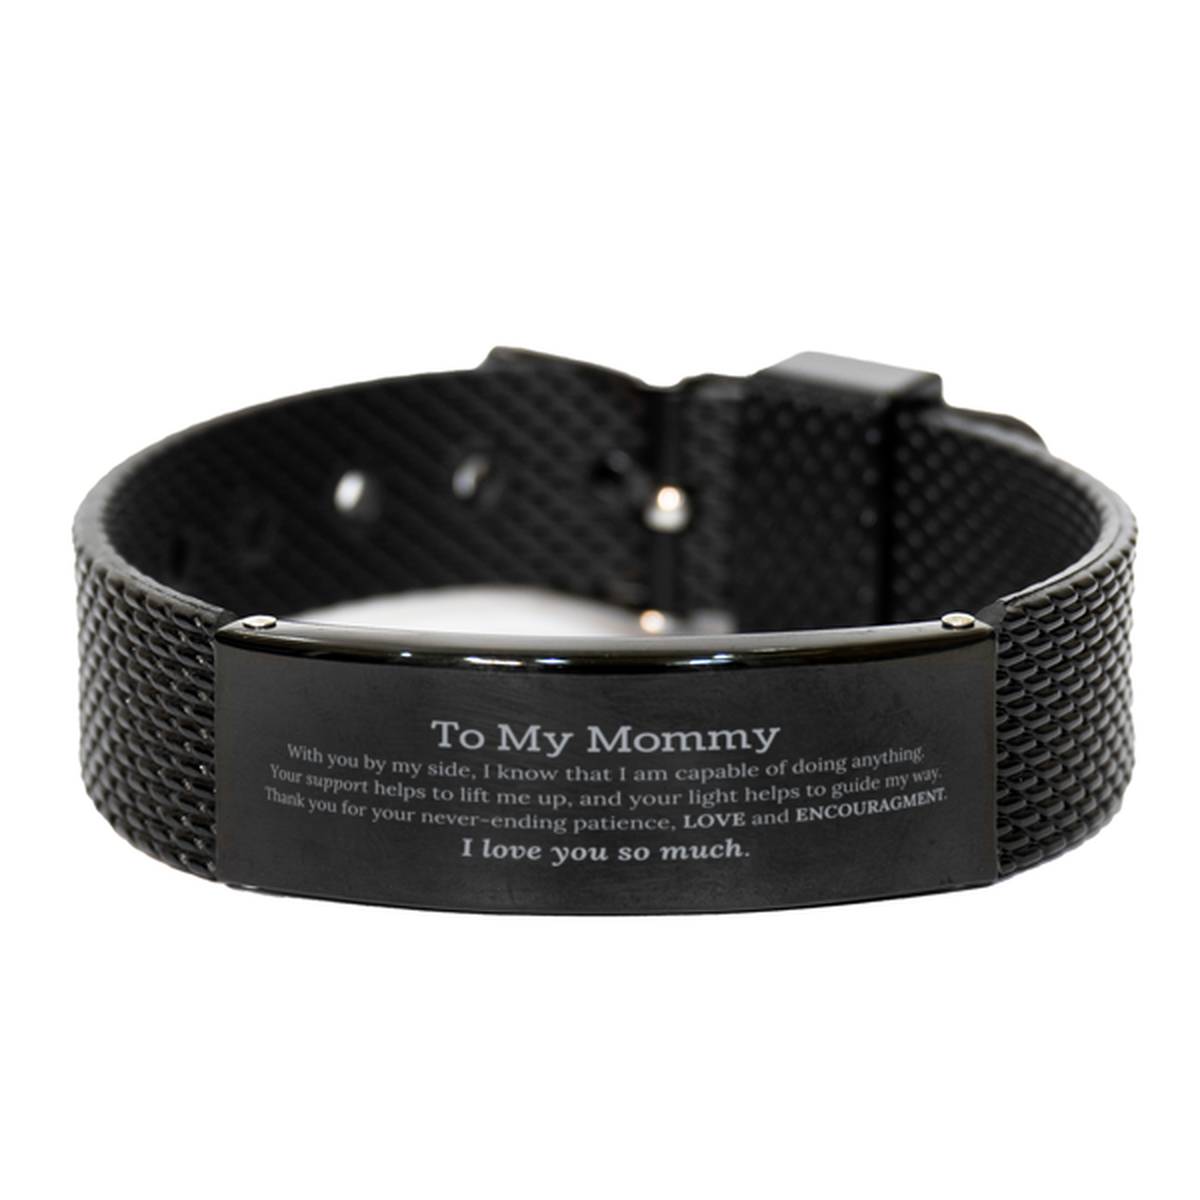 Appreciation Mommy Black Shark Mesh Bracelet Gifts, To My Mommy Birthday Christmas Wedding Keepsake Gifts for Mommy With you by my side, I know that I am capable of doing anything. I love you so much